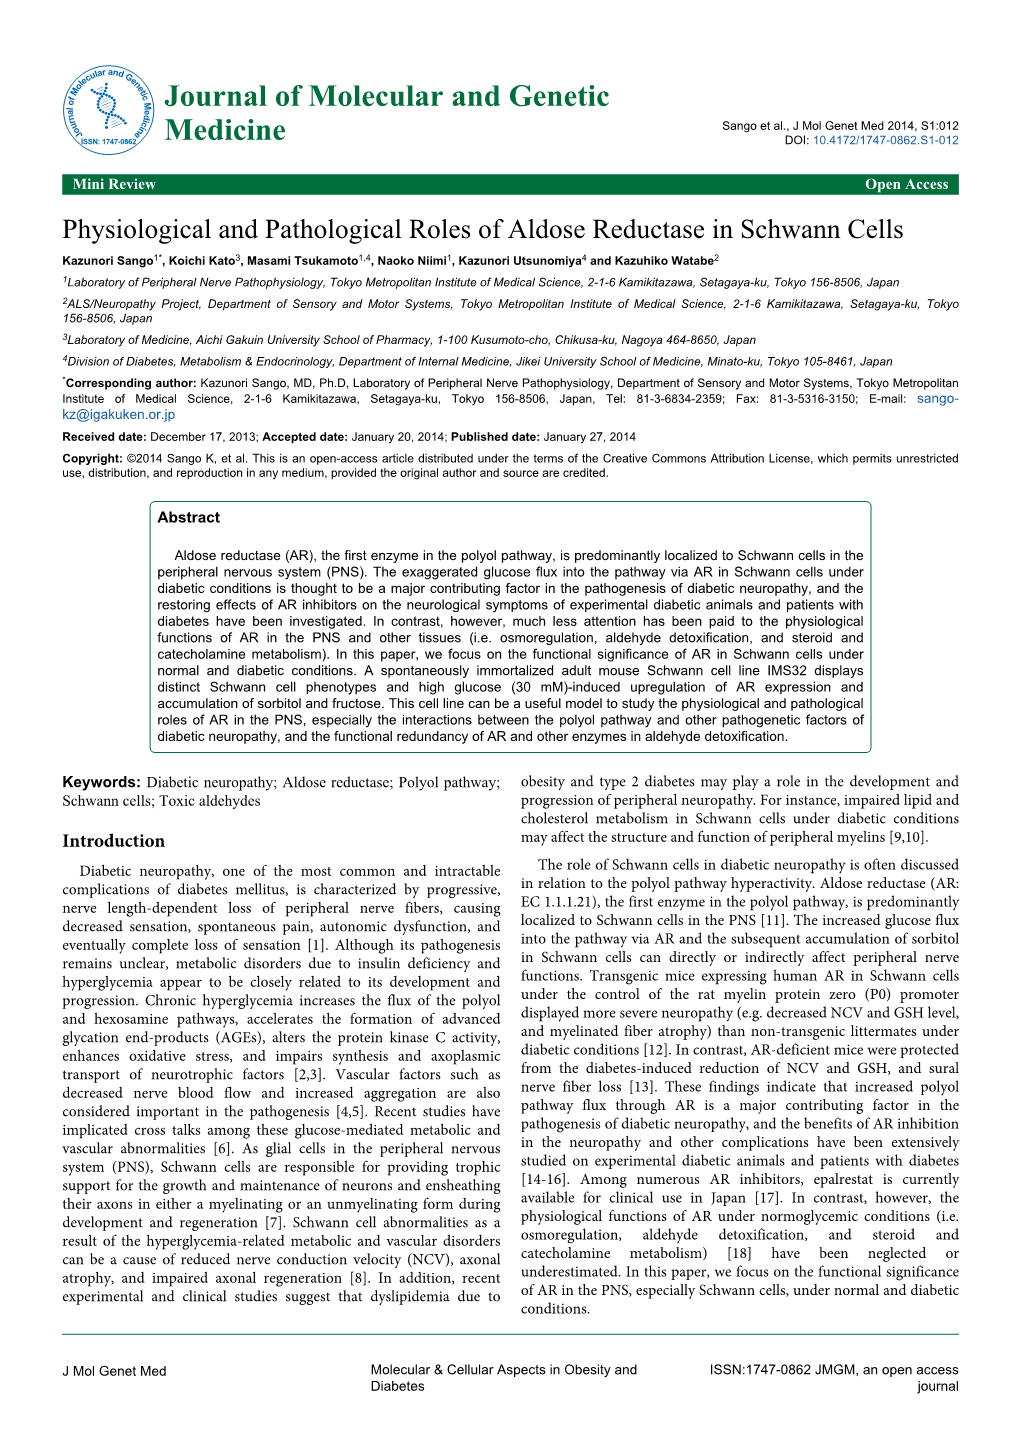 Physiological and Pathological Roles of Aldose Reductase in Schwann